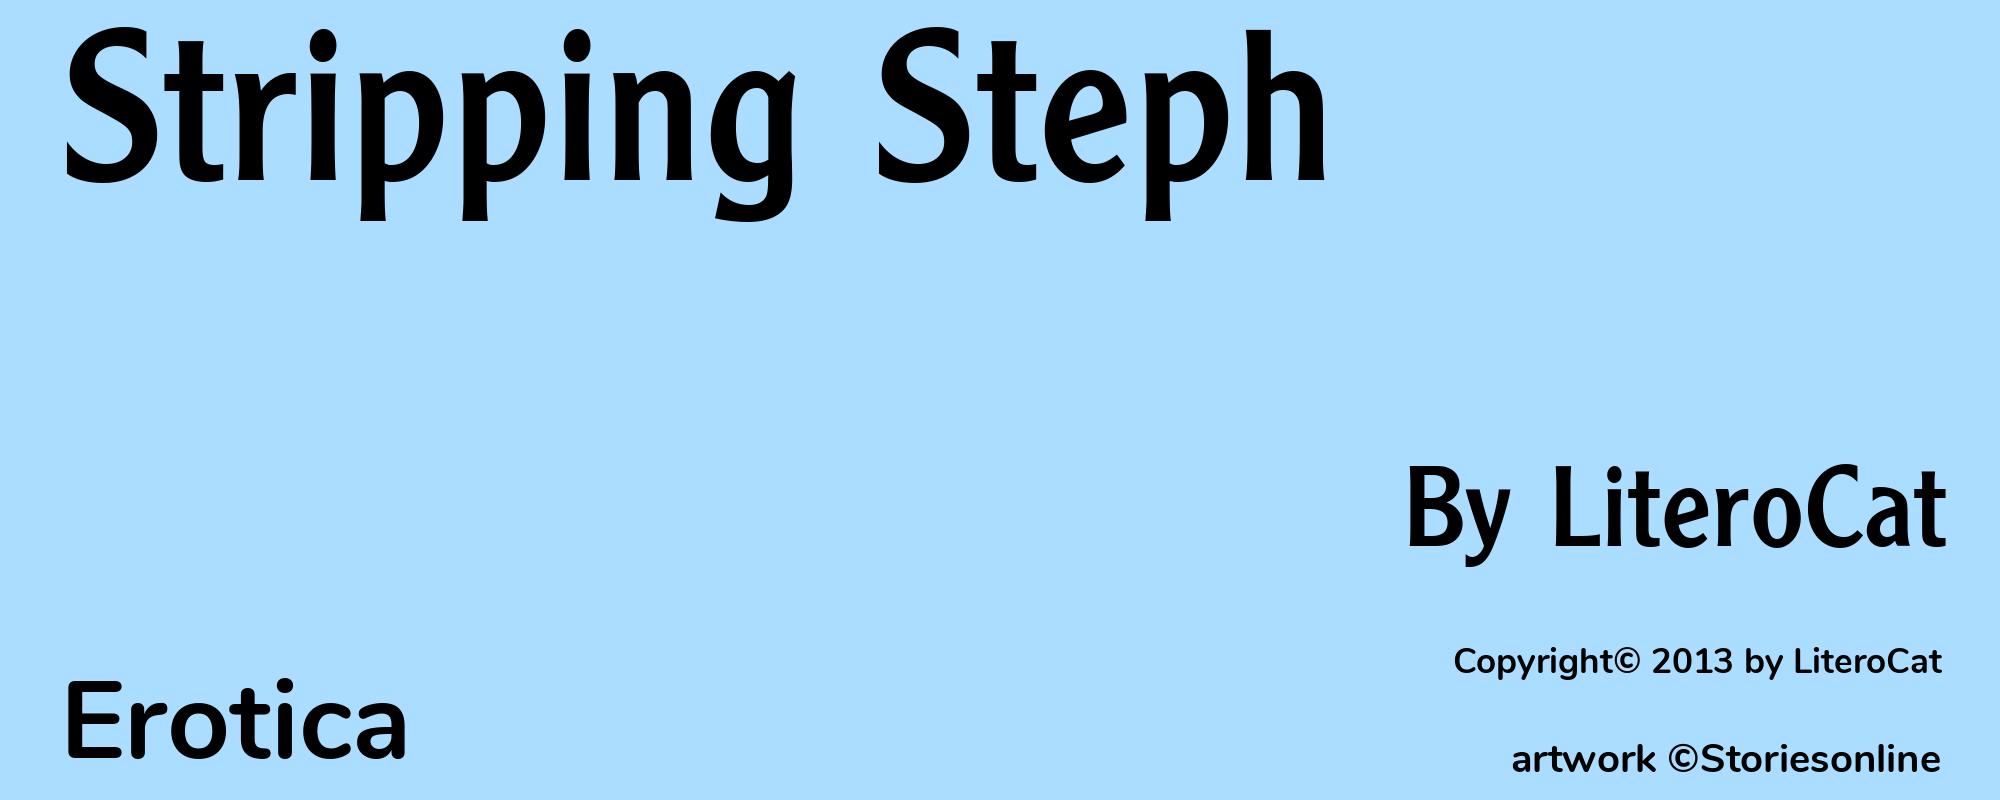 Stripping Steph - Cover